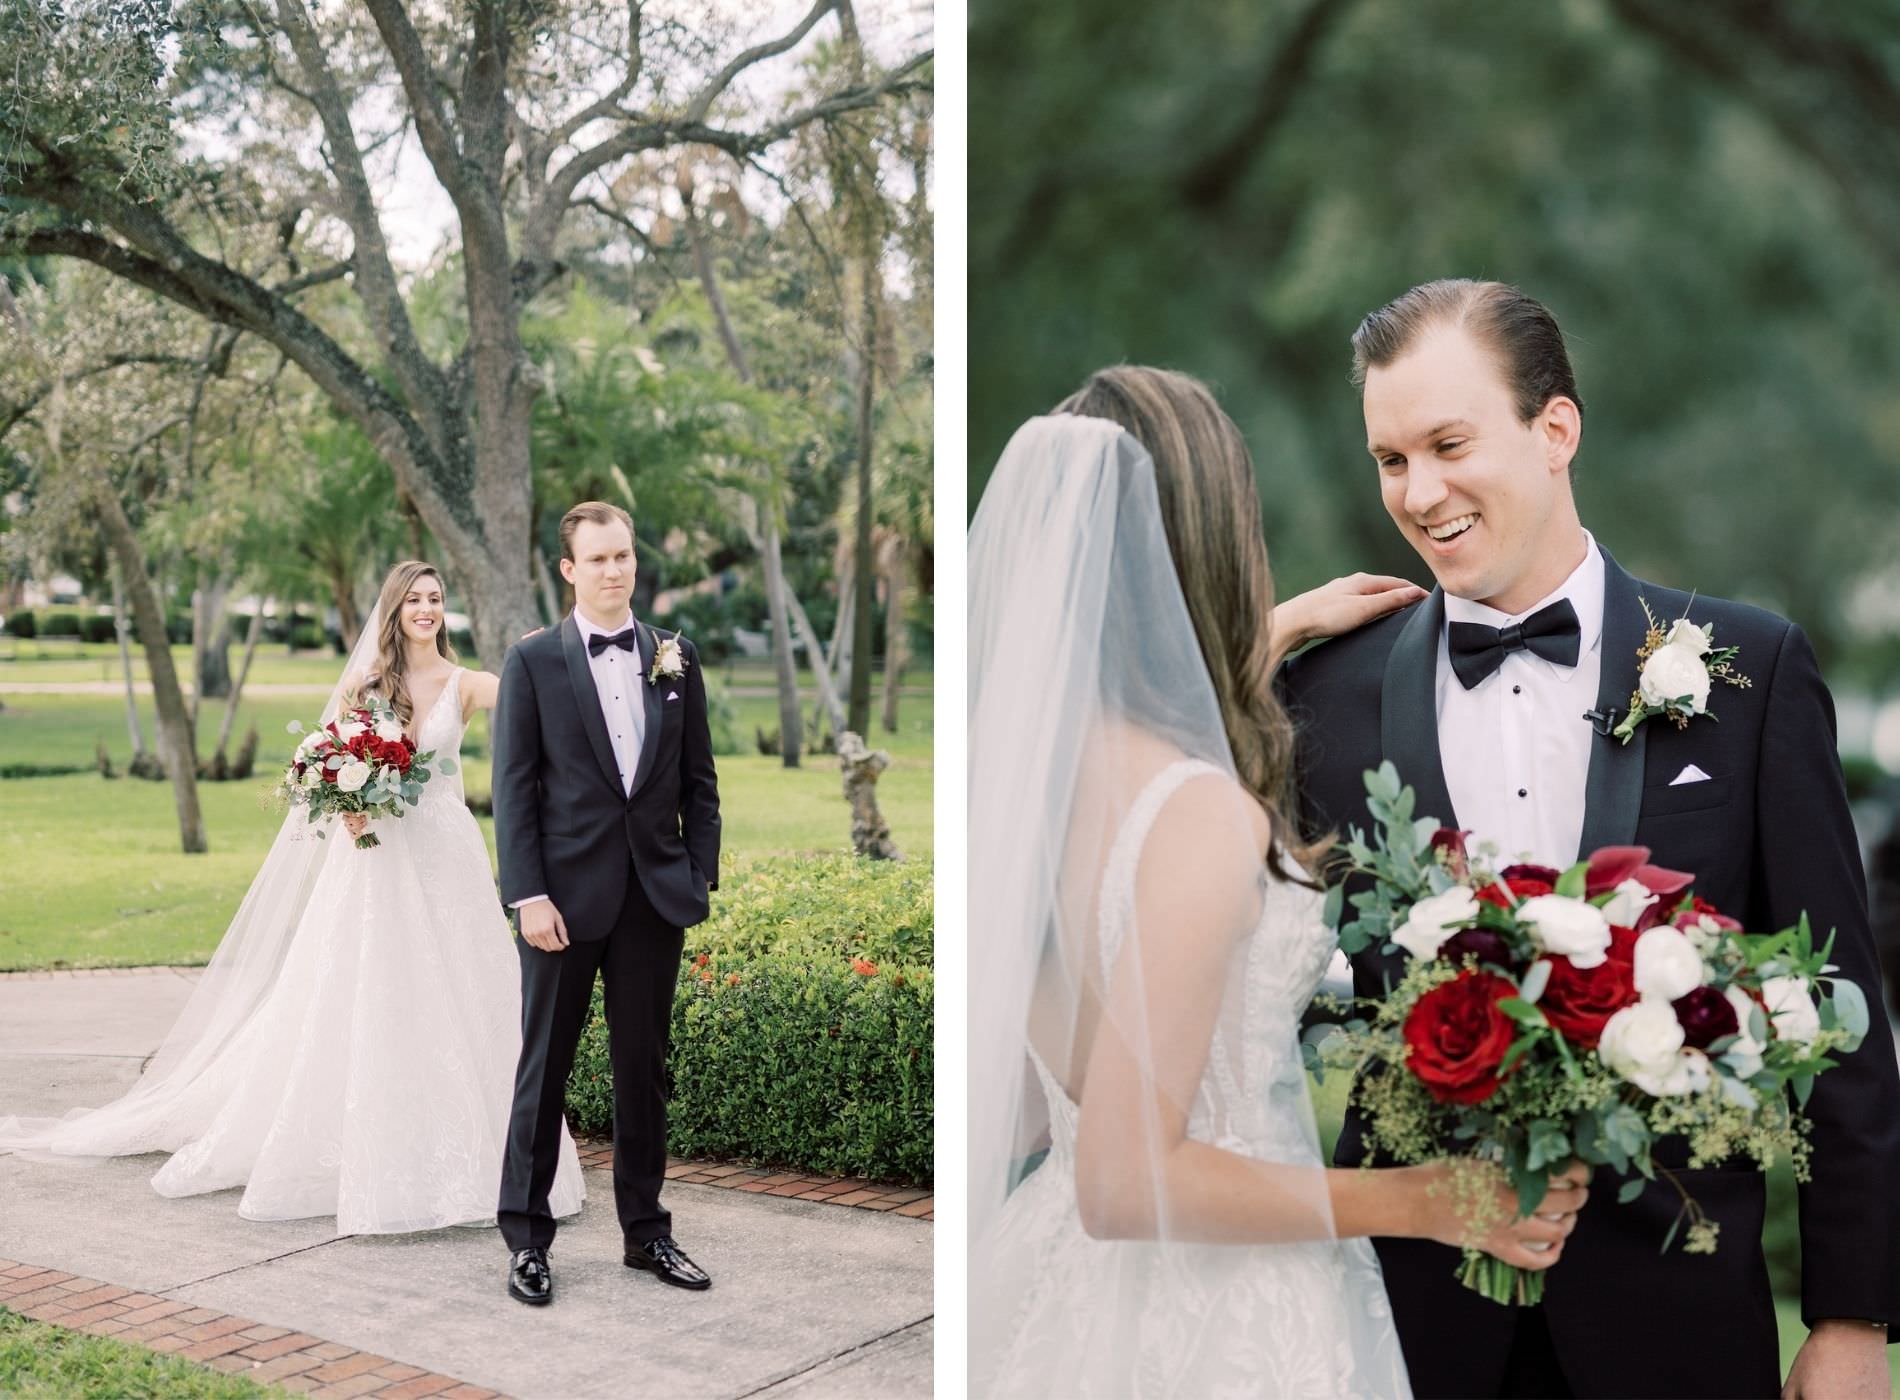 Outdoor Bride and Groom First Look Portrait | V Back Embroidered Illusion Panel Allure Couture Designer Wedding Dress Bridal Gown with Long Cathedral Veil | Fall Wedding Bridal Bouquet with Red and White roses and Eucalyptus Greenery | Groom in Classic Black Suit Tux with Bow Tie